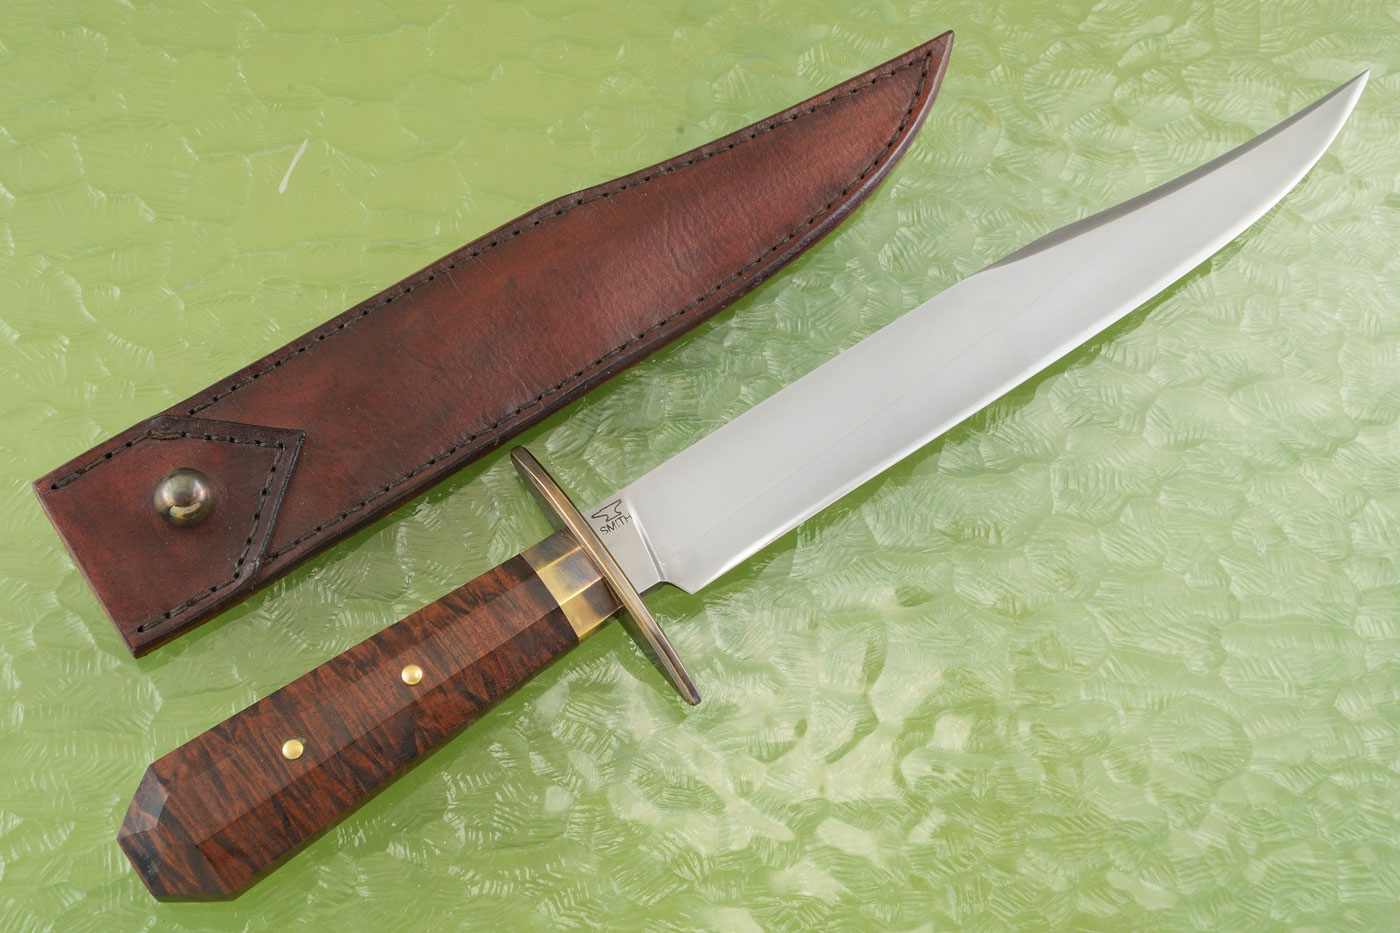 Forged Bowie with Mabandolo<br><i>Best Fighter - 2019 Durban Easter Knife Show</i>